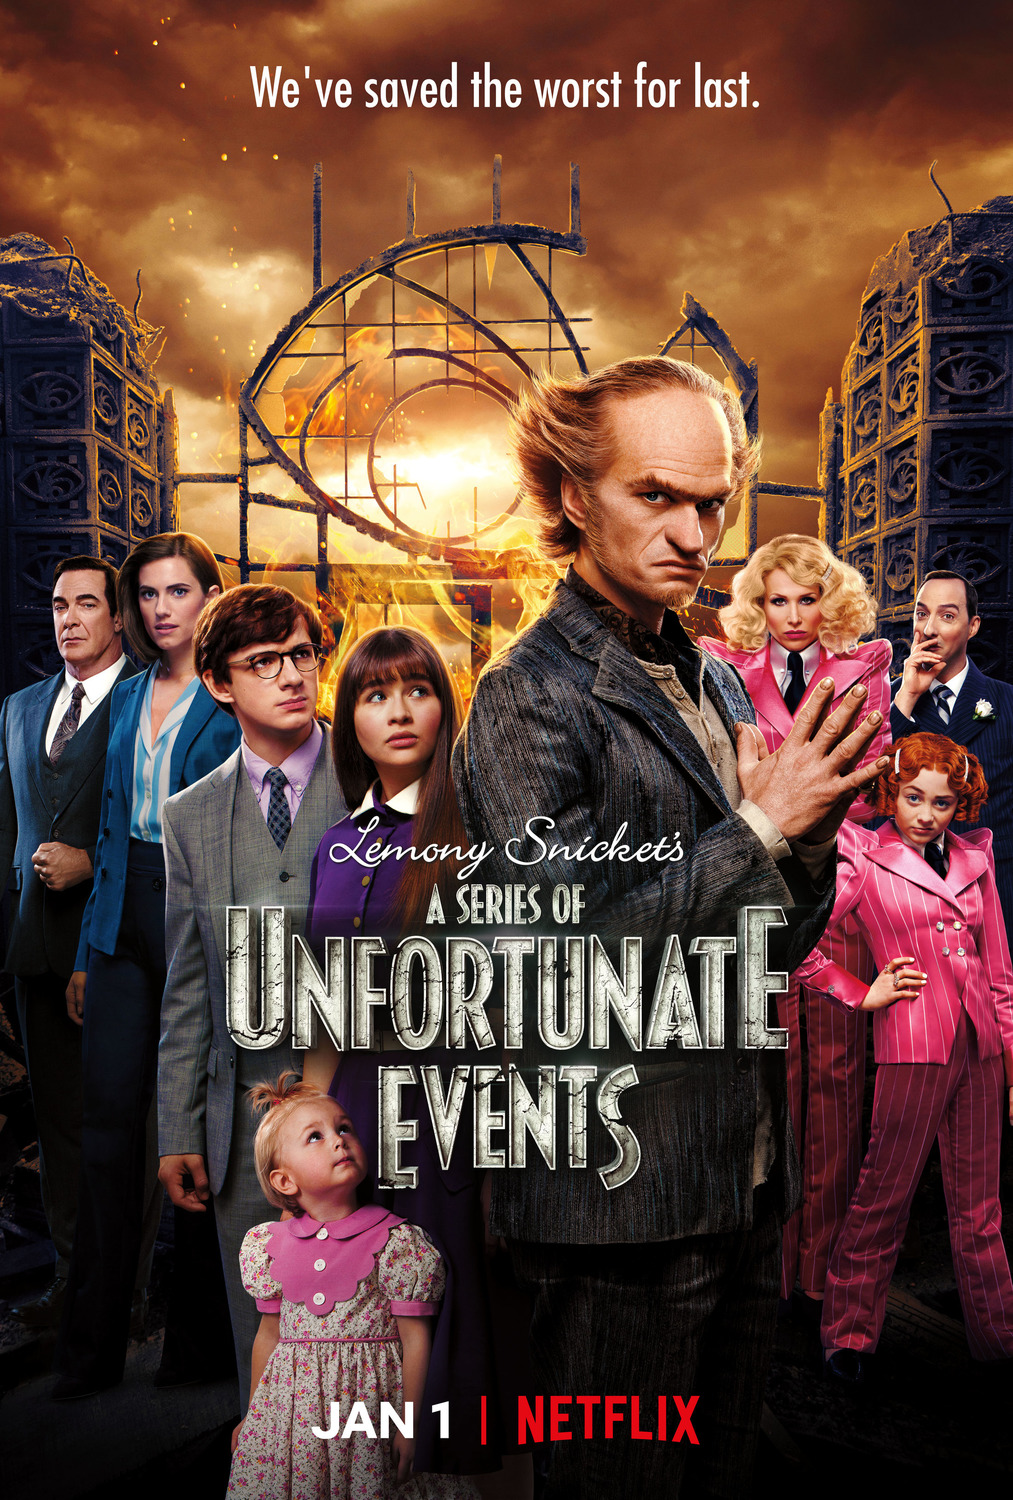 A SERIES OF UNFORTUNATE EVENTS Season 3 The Art of VFX